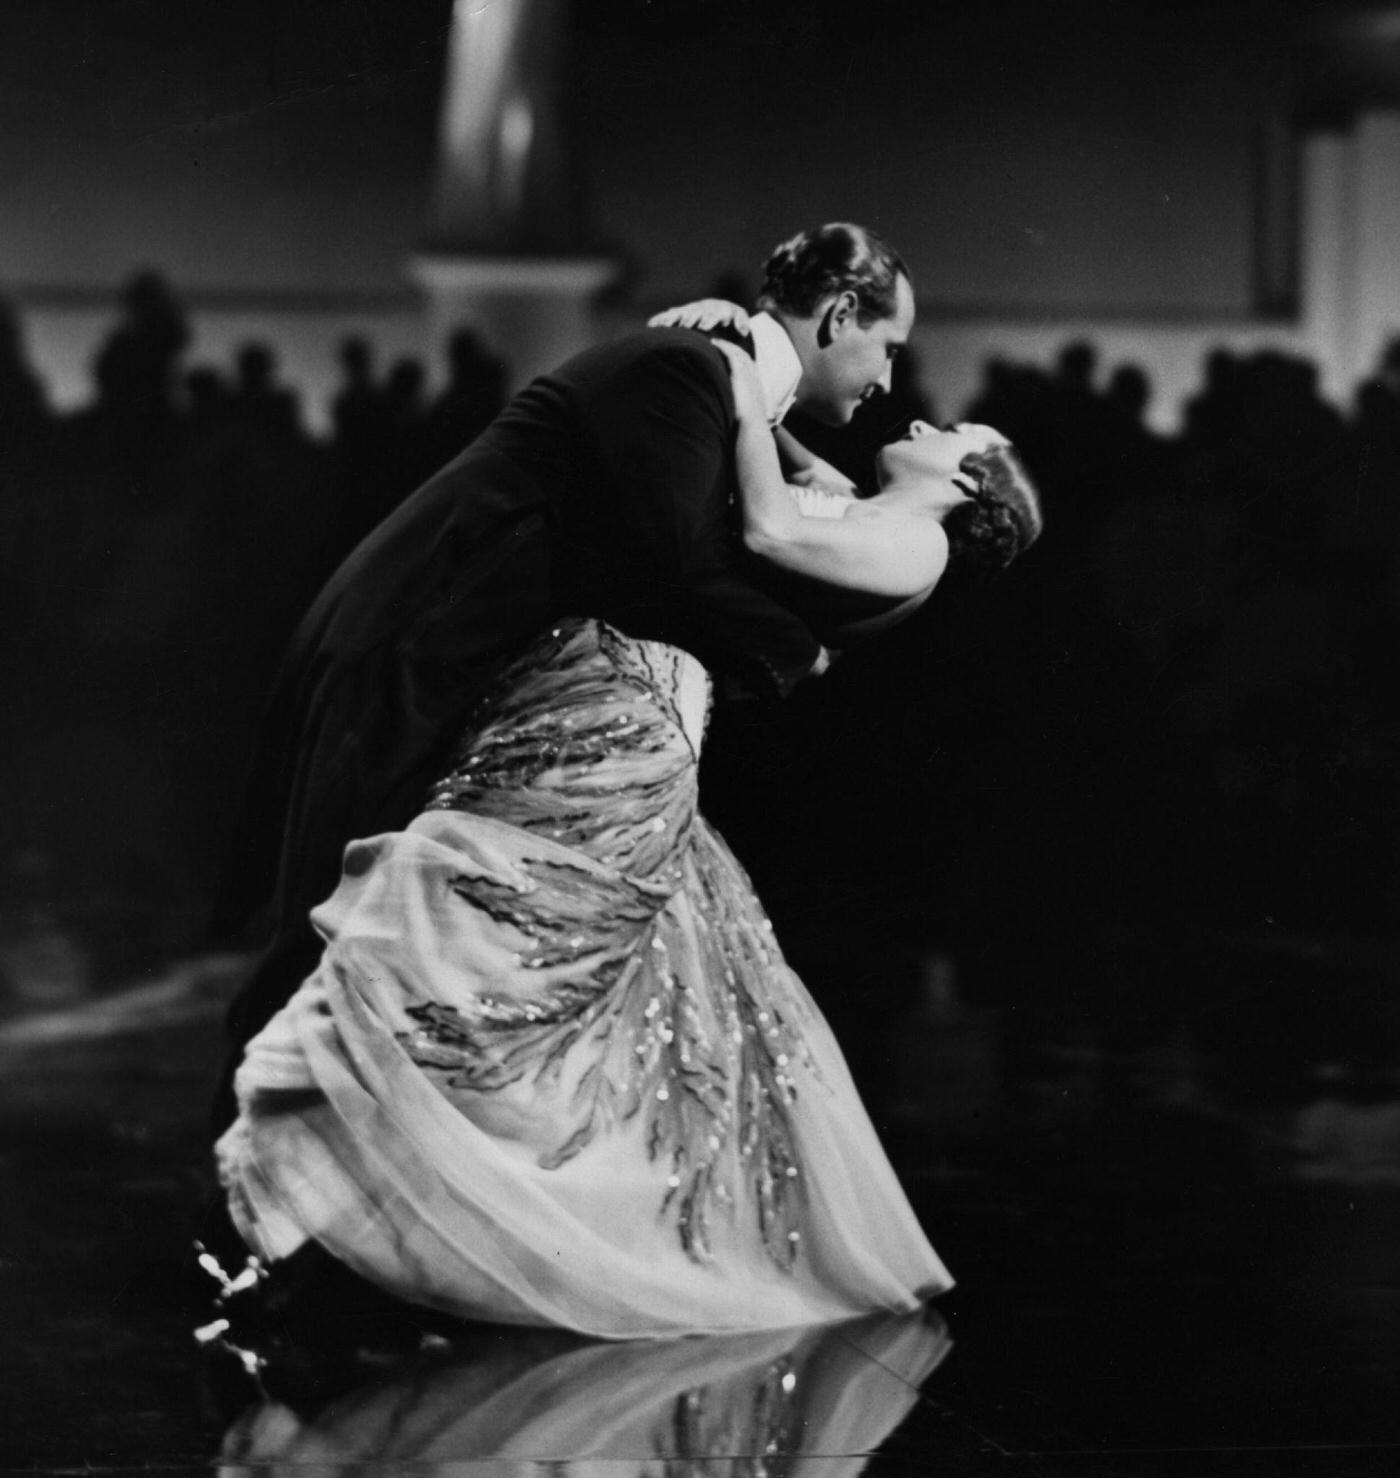 Cabaret dancing duo Veloz and Yolanda perform the tango in a scene from the film 'The Pride Of The Yankees, 1942